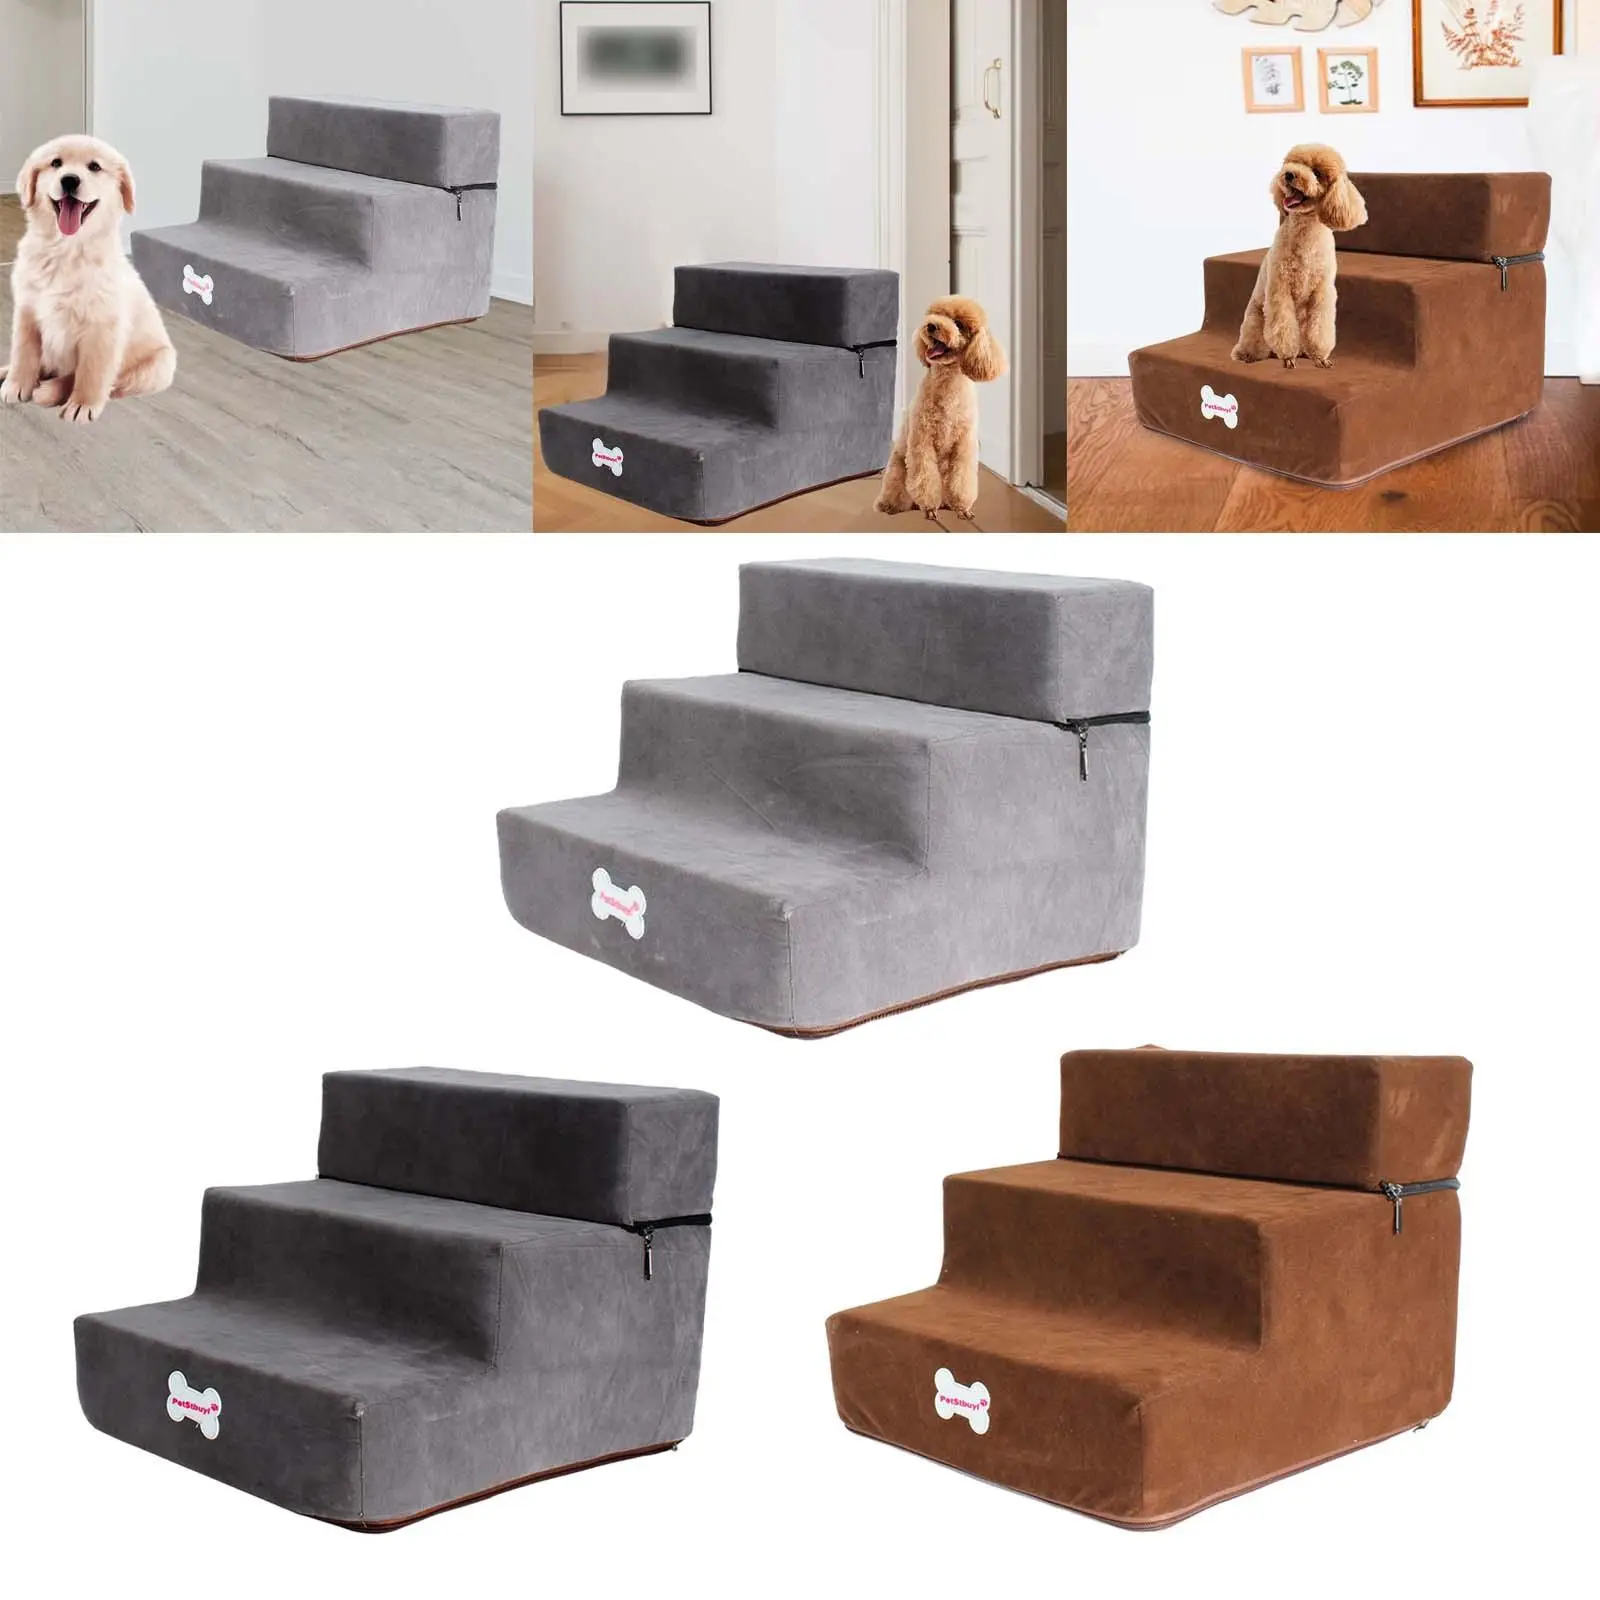 Dog Stairs Ladder Anti Slip Sponge Toys Step Platform 3 Steps Washable Supplies Couch for Puppy Large Dog Climbing High Bed Sofa